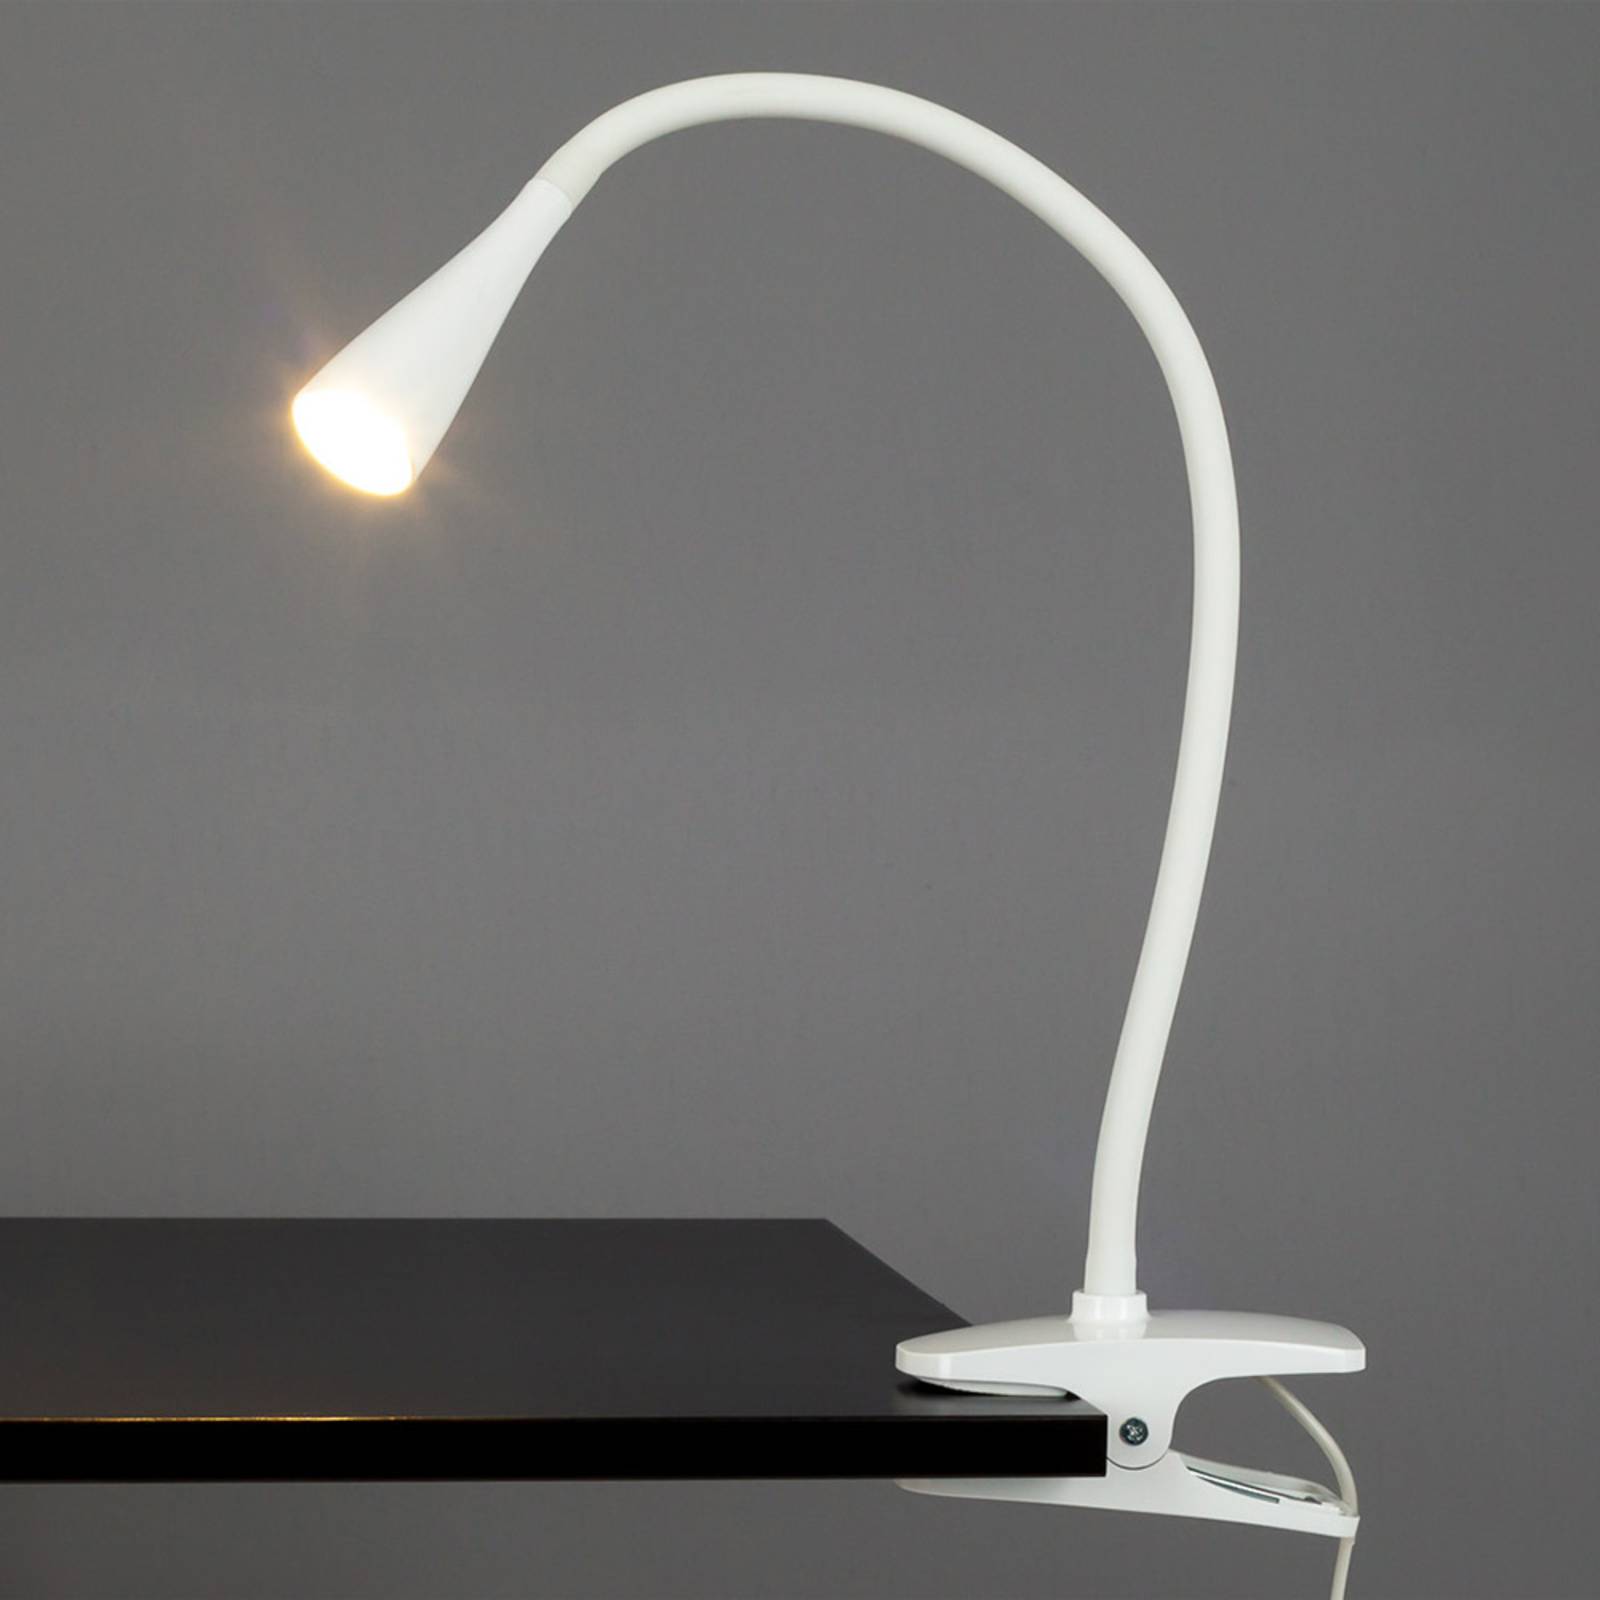 Photos - Chandelier / Lamp Lindby Baris, Narrow LED Clip-on Lamp in White 